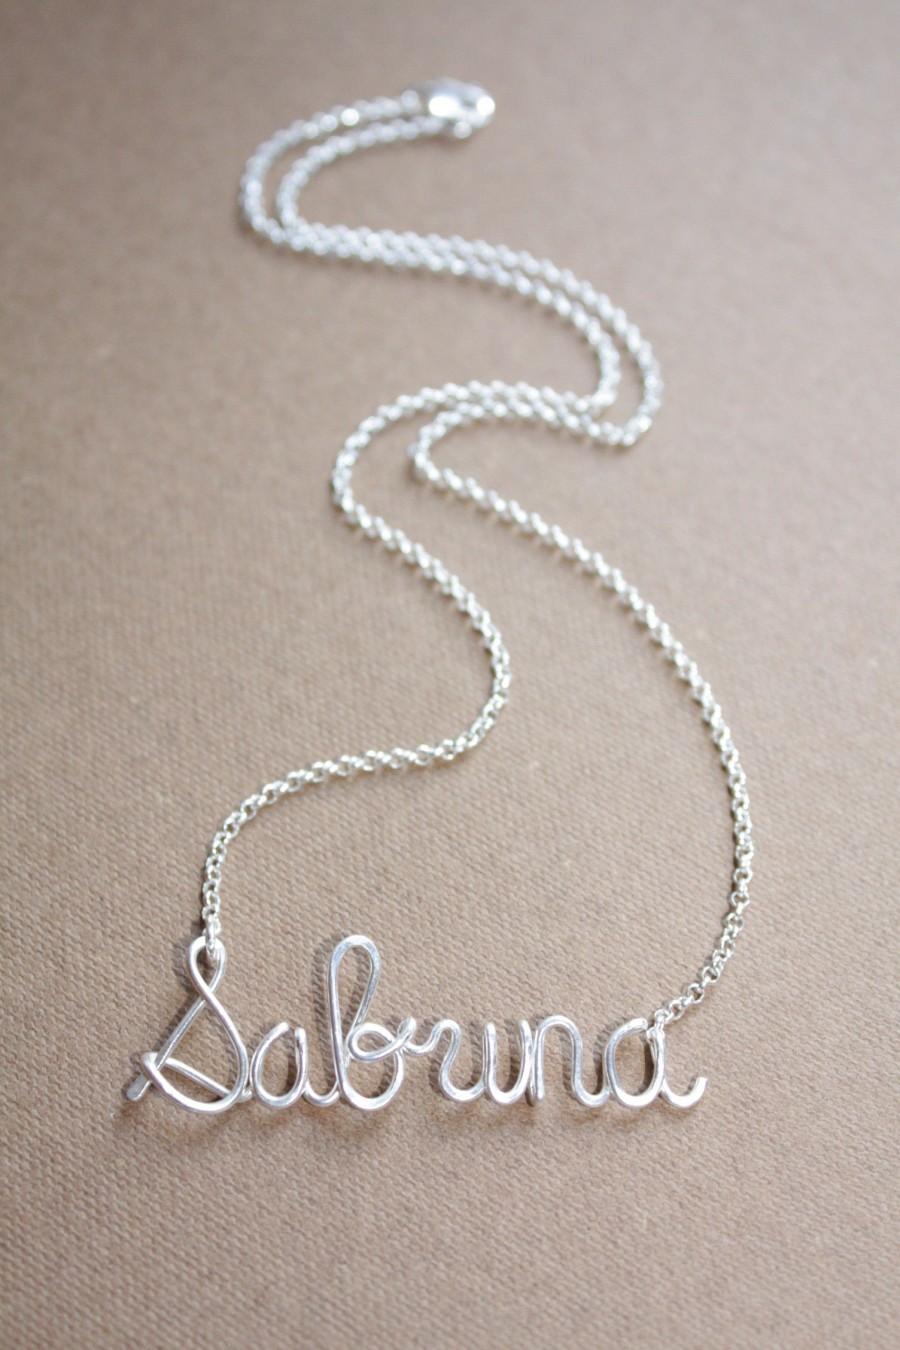 Mariage - Tiny Silver Name Necklace-Personalized Necklace-Name Necklace-Custom Name Necklace-Name Jewelry-Personalized Name Wire Jewelry Di & De